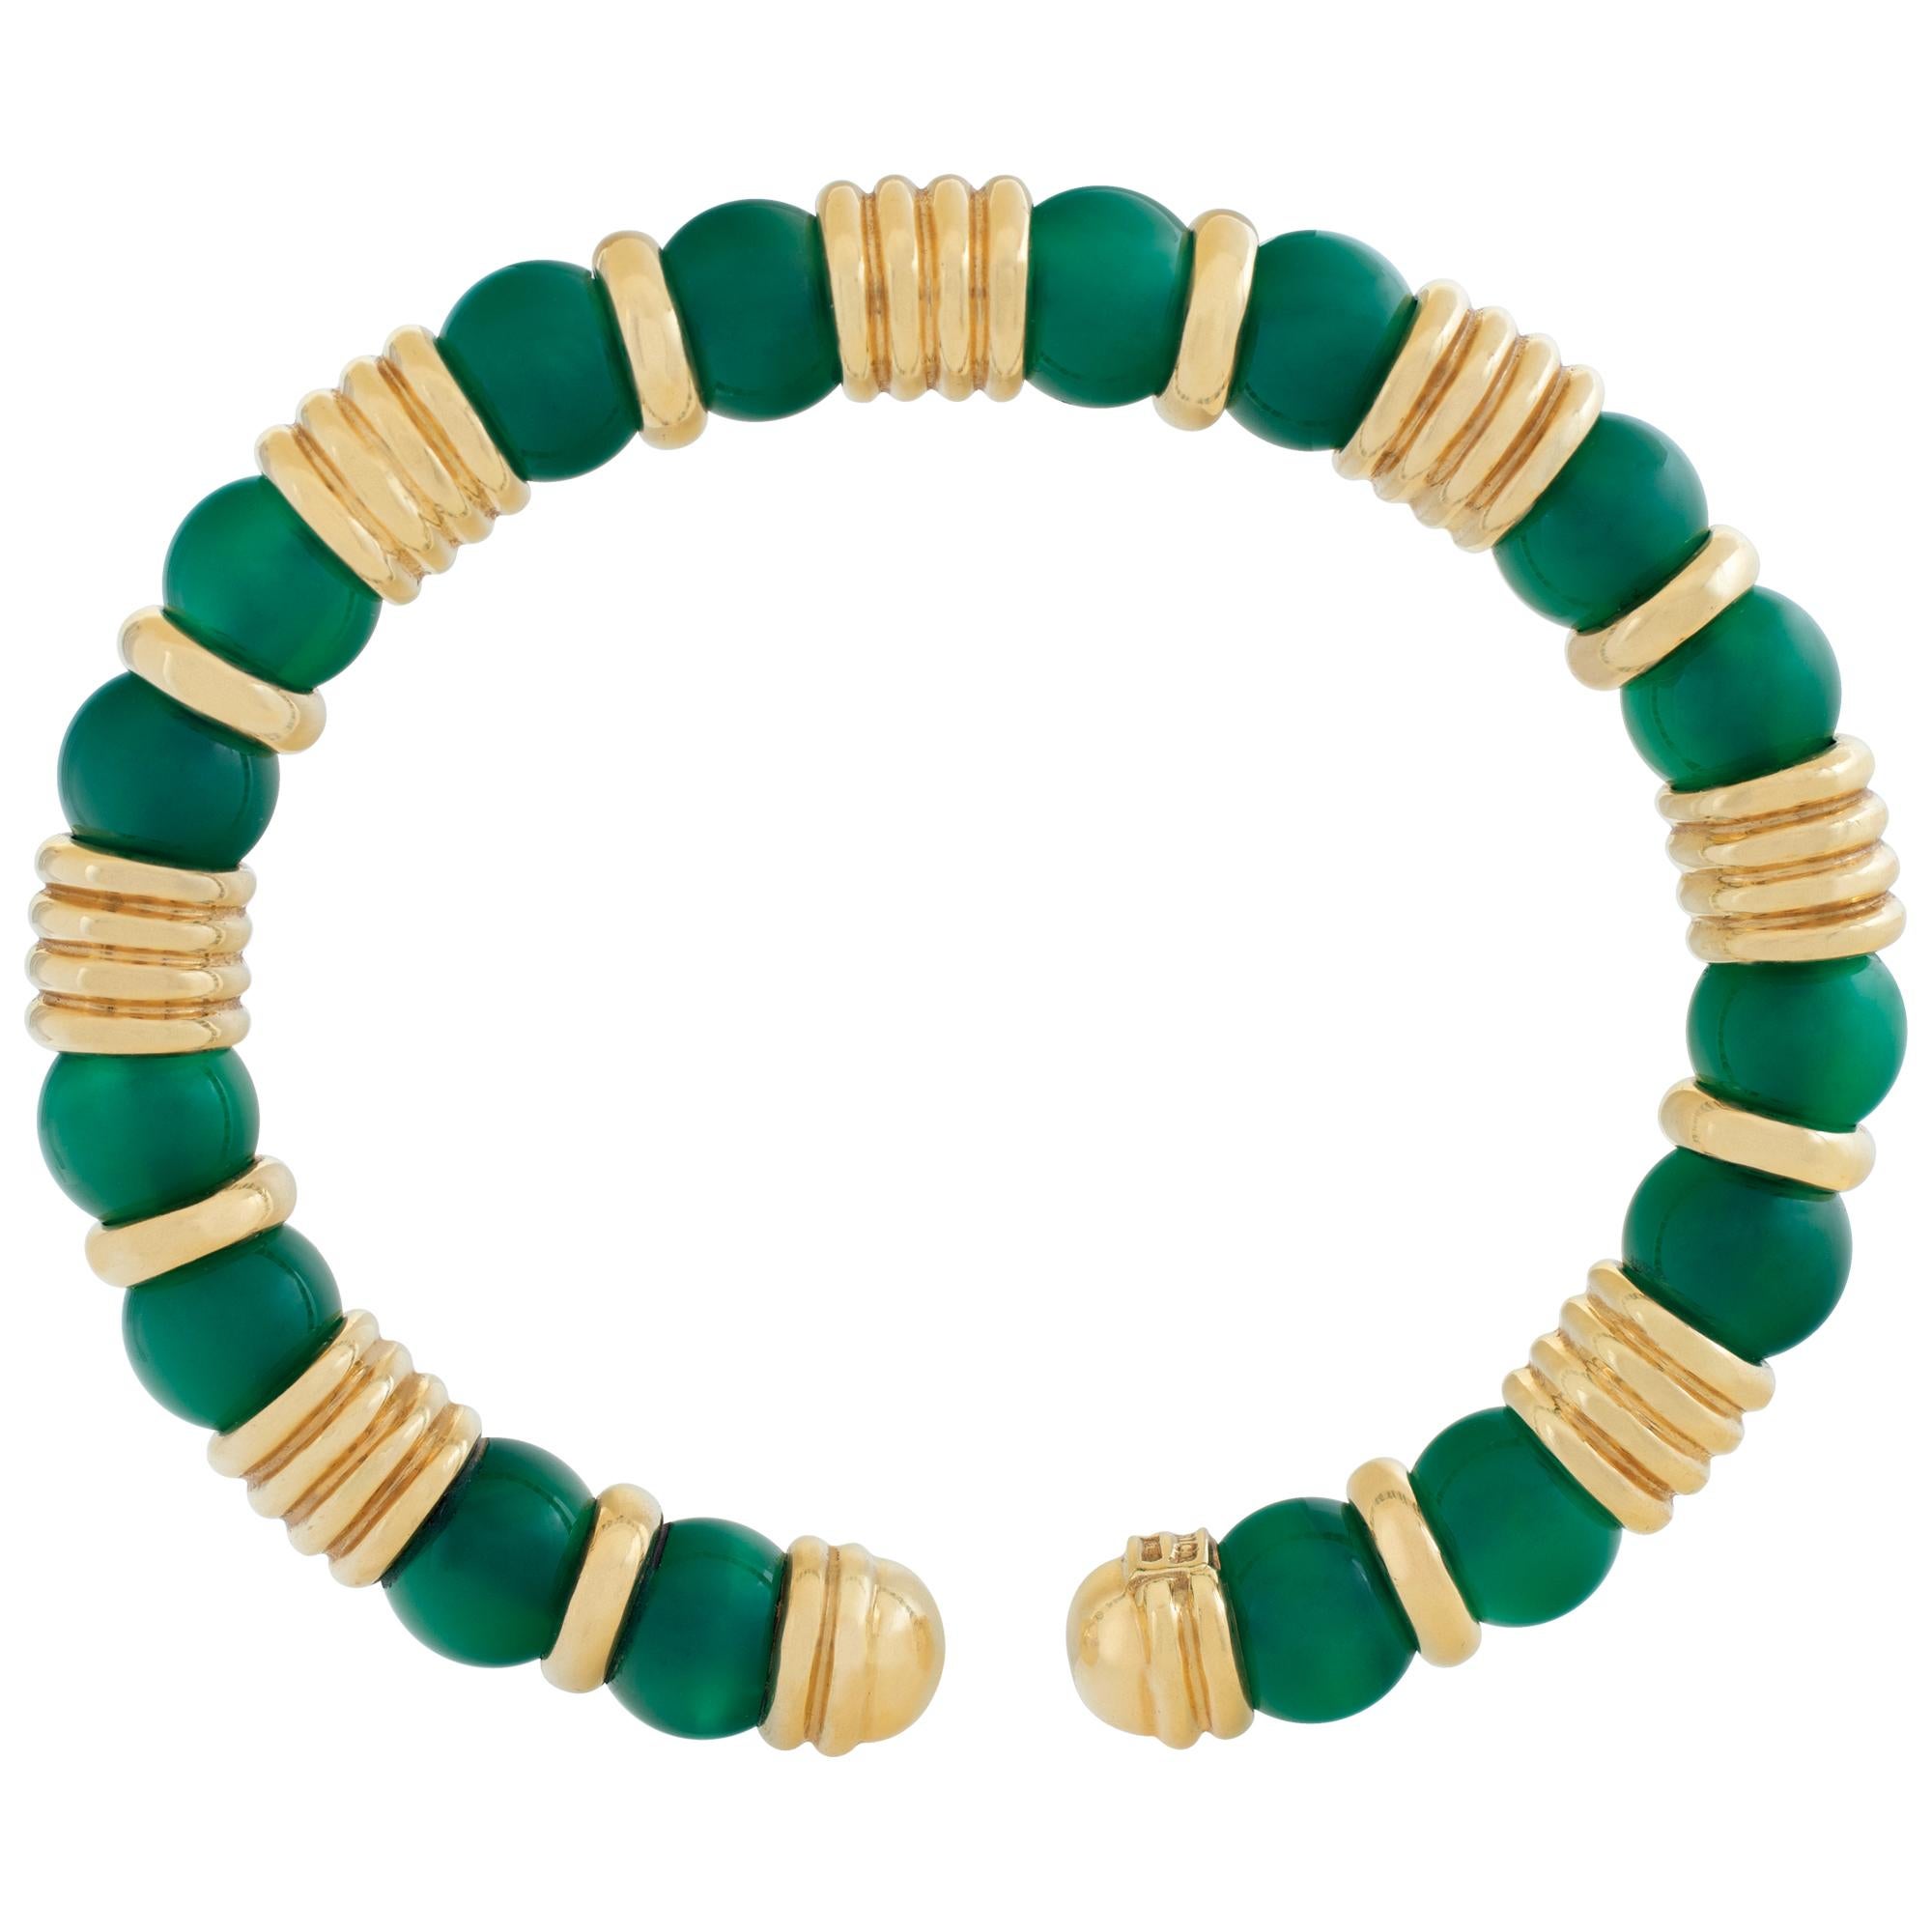 Caprice Jade Bracelet in 18k Fits Up to Wrist In Excellent Condition For Sale In Surfside, FL